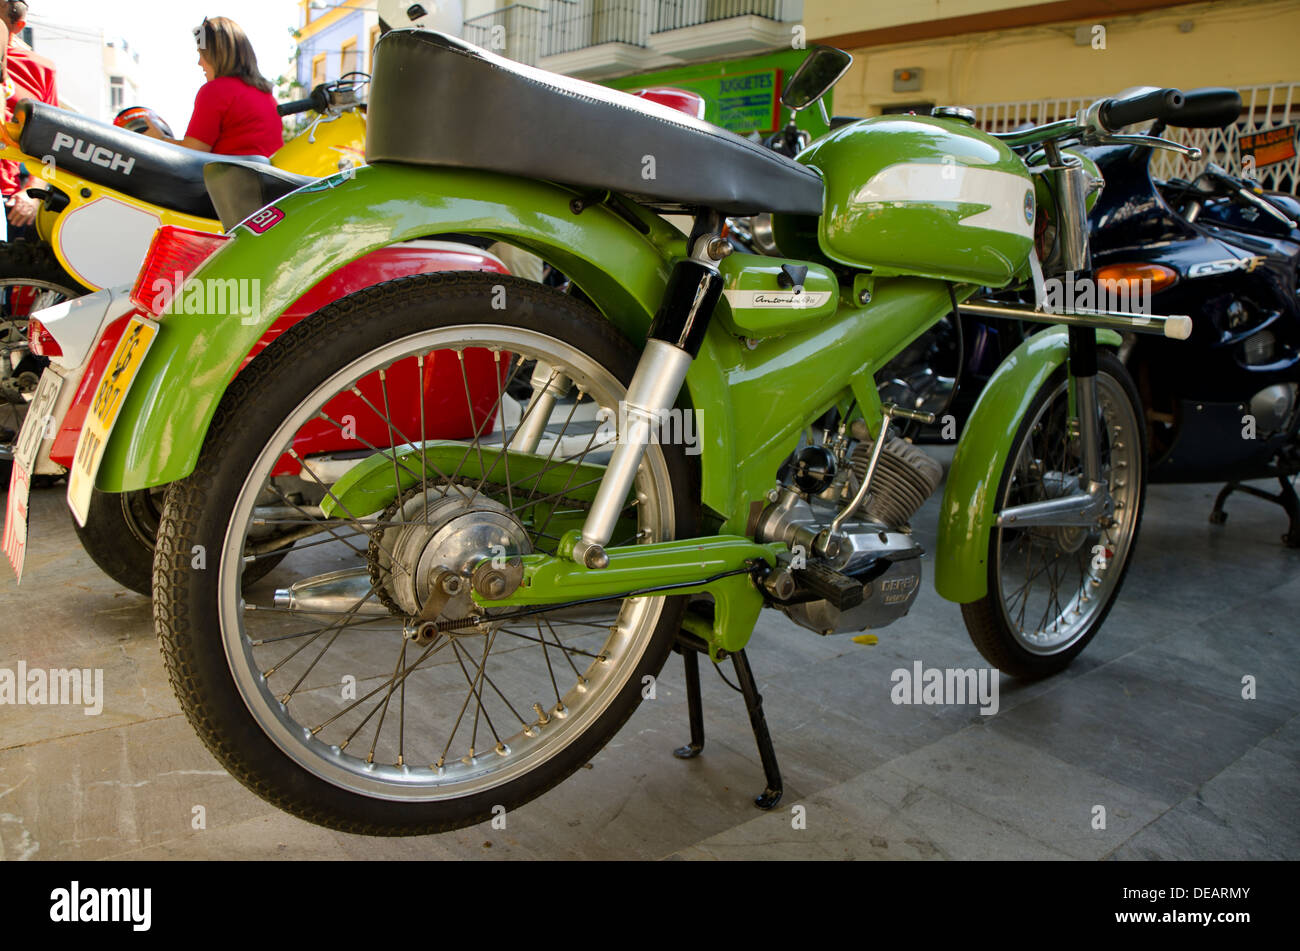 Derbi Antorcha 49cc classic motorcycle on display at a vintage motorbike  meeting in Coin, Andalusia, Spain Stock Photo - Alamy